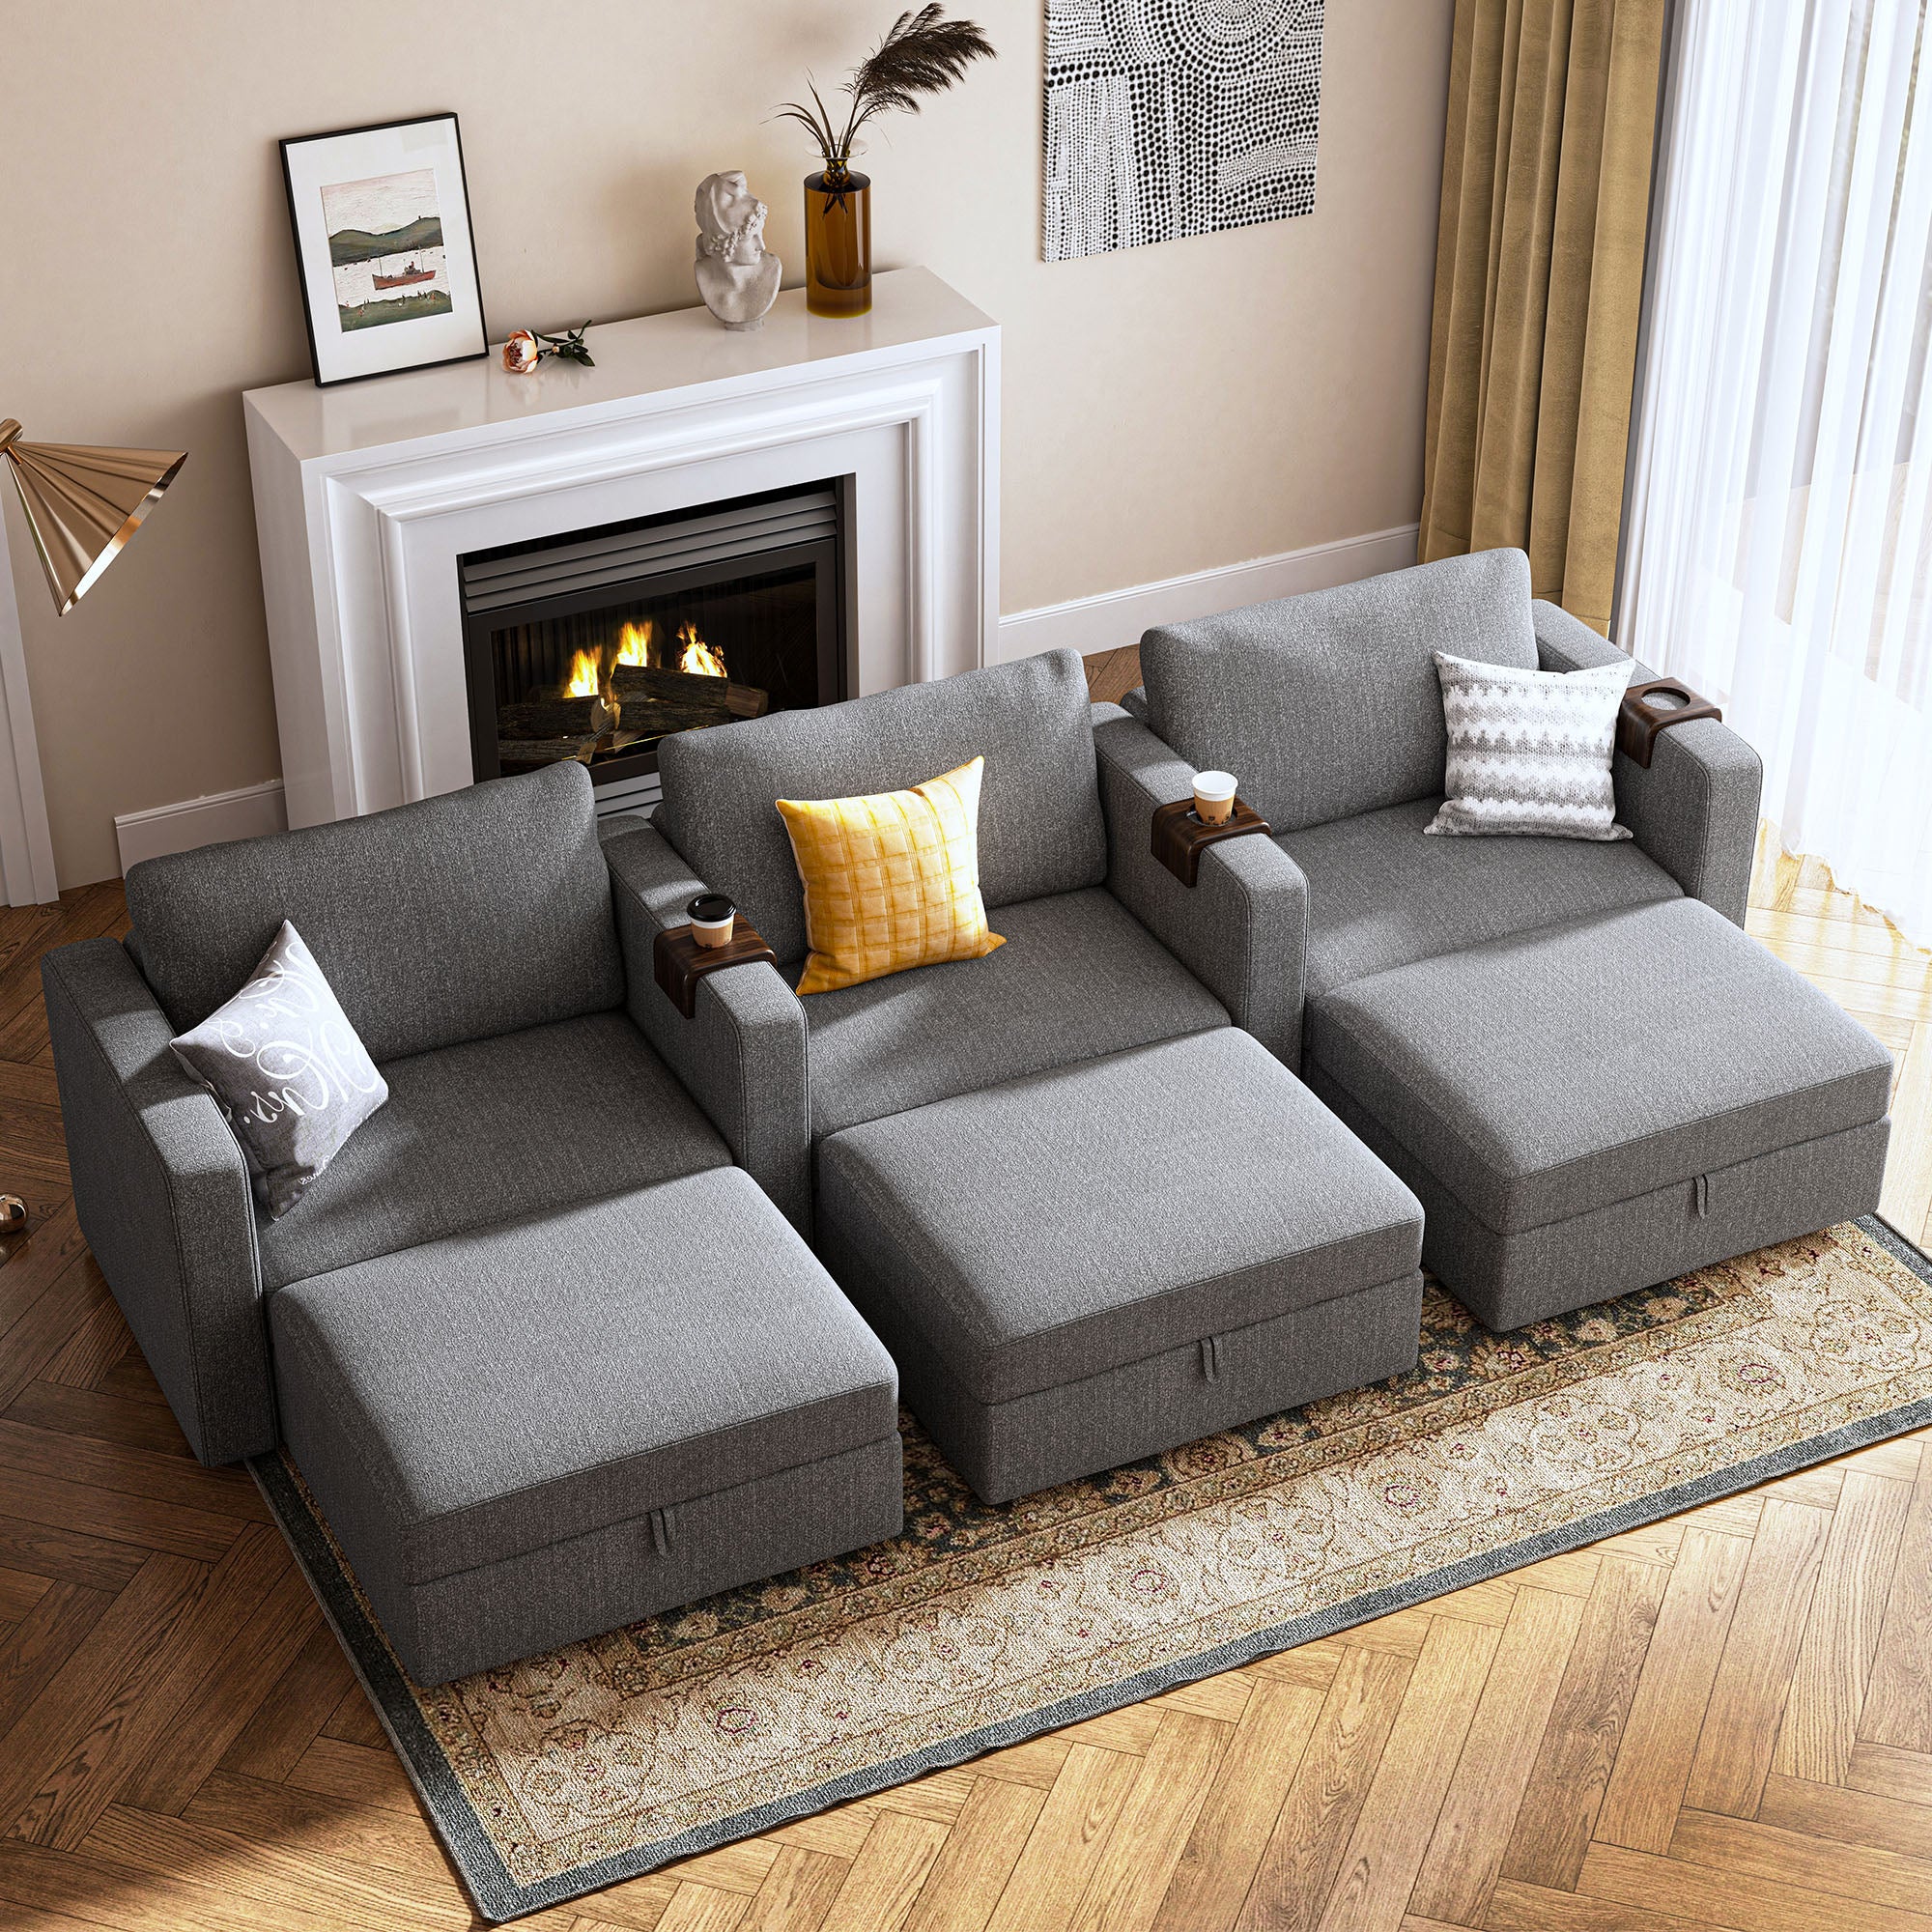 3 Seat Wider Modular Sofa Couch For